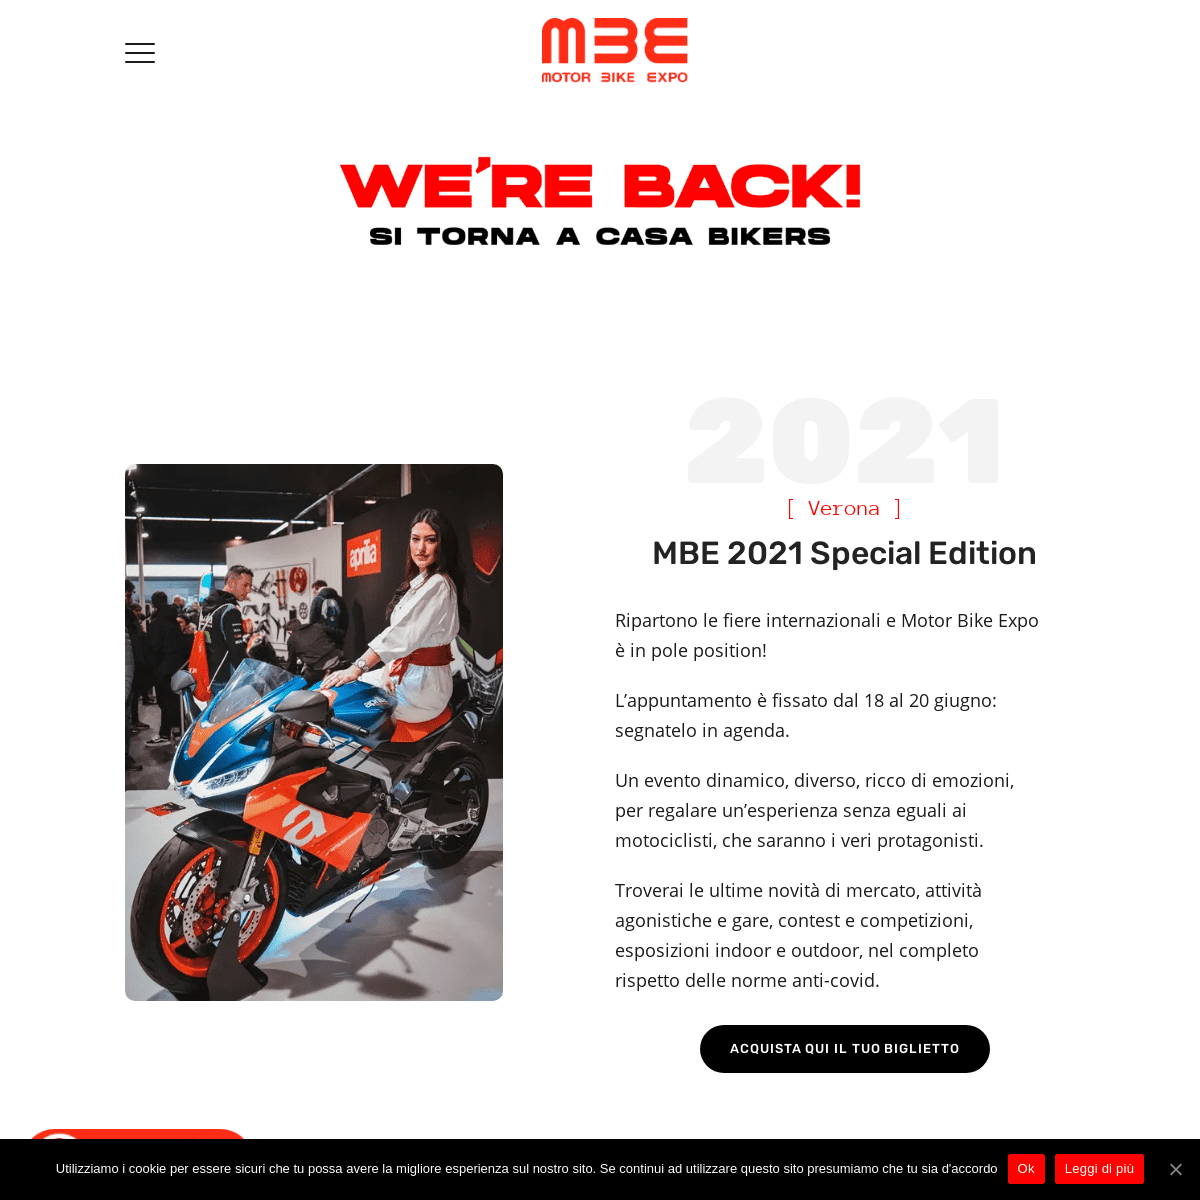 A complete backup of https://motorbikeexpo.it